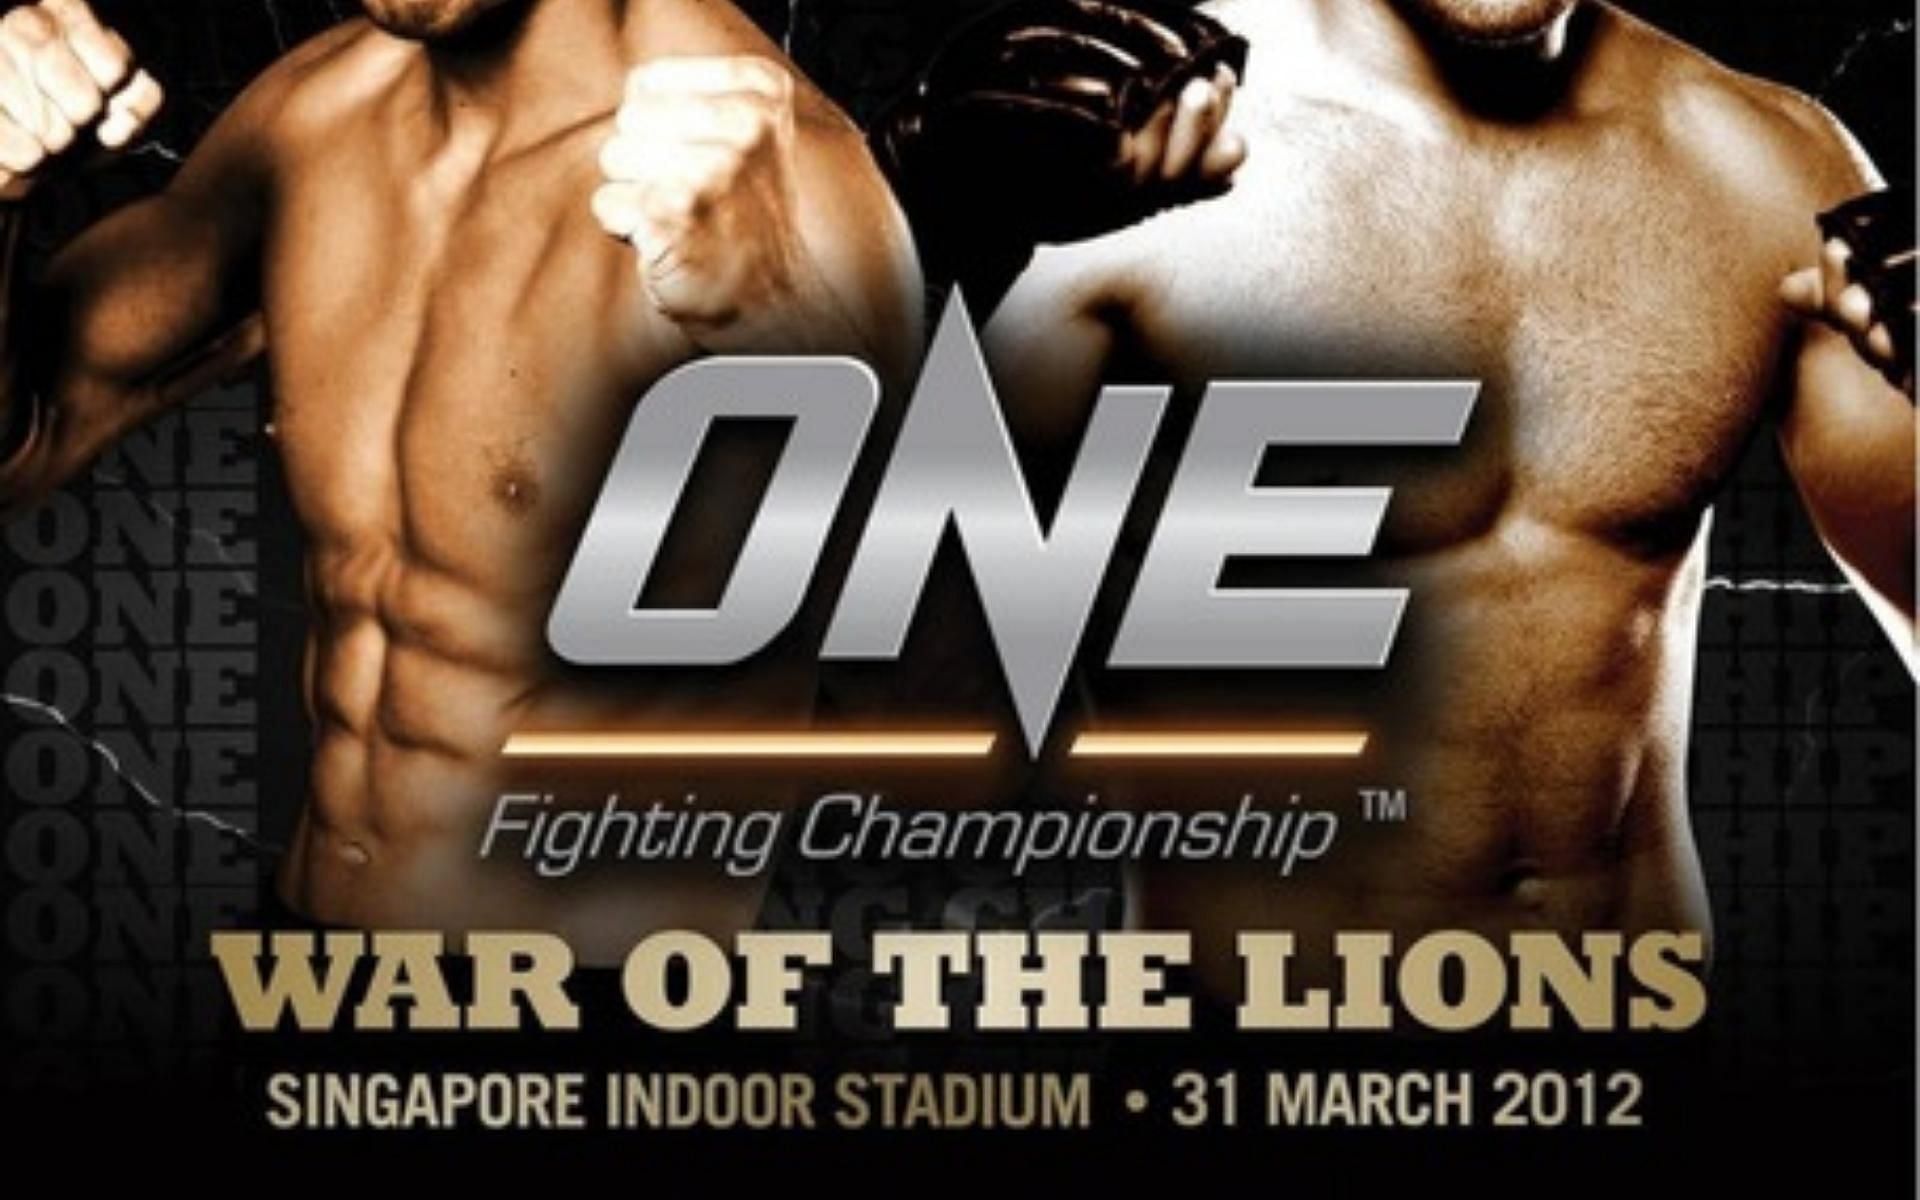 ONE Fighting Championship: War of the Lions happened on March 31, 2012 at the Singapore Indoor Stadium. (Image courtesy of MMA Mania)